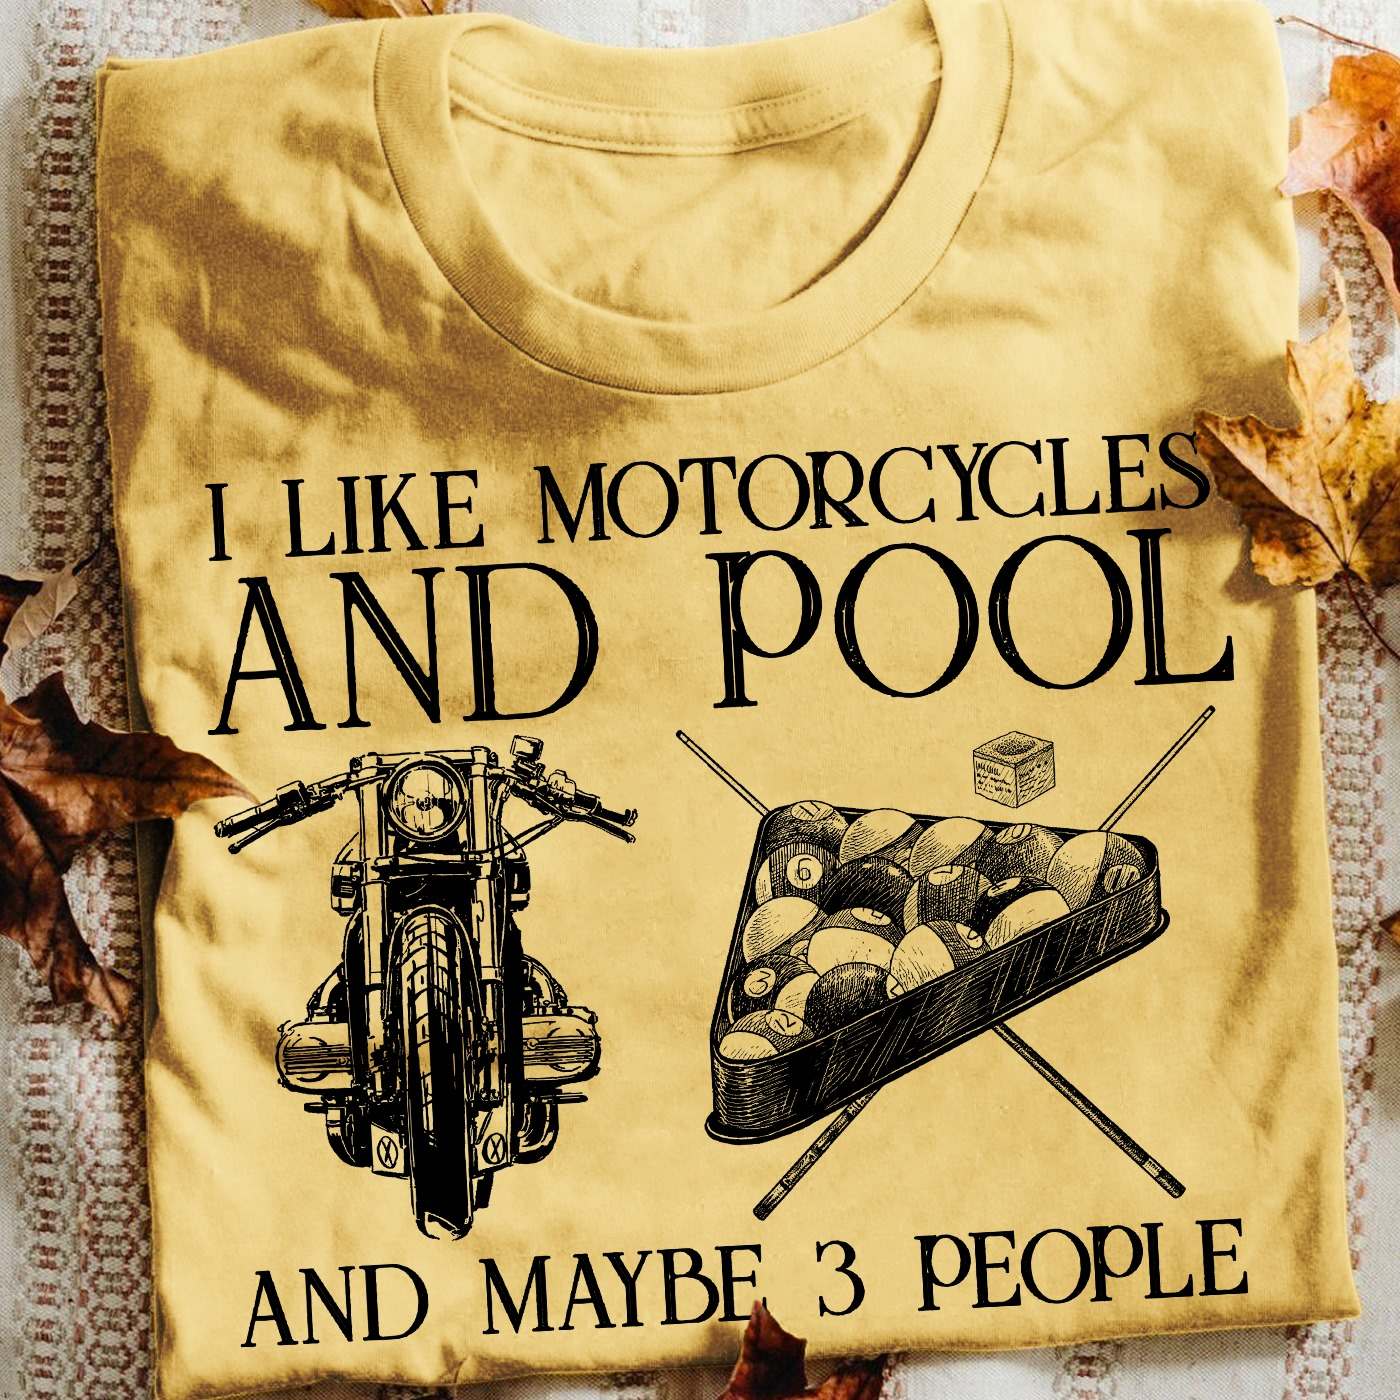 I like motorcycles and pook and maybe 3 people - Love playing pool